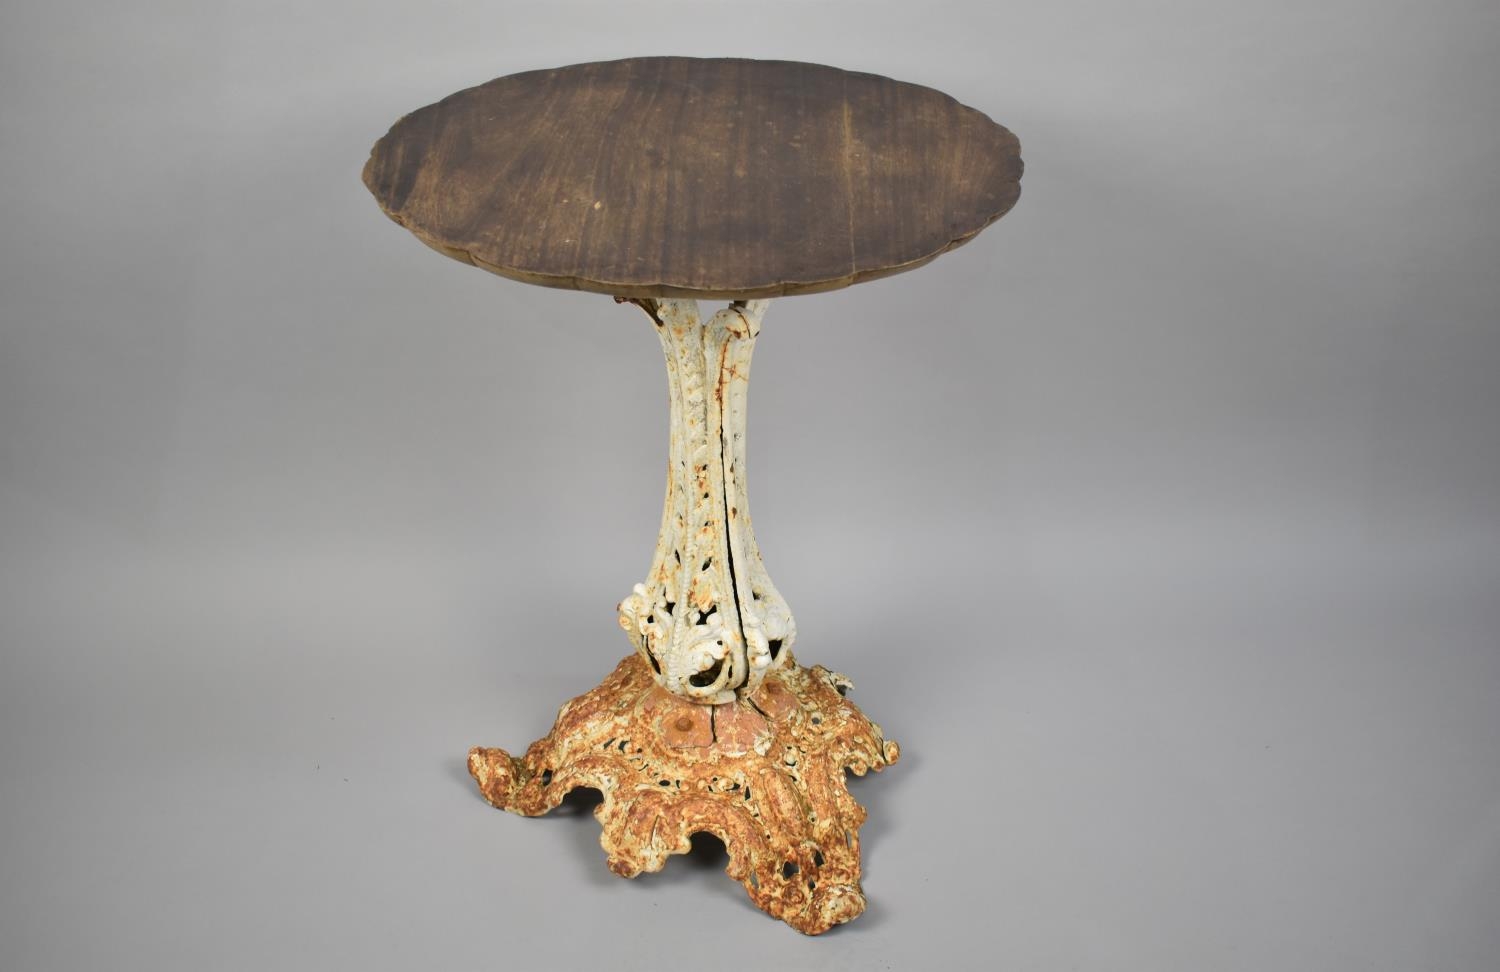 A 19th Century Cast Iron Garden Table in the Style of Coalbrookdale with a Wooden Top and Various